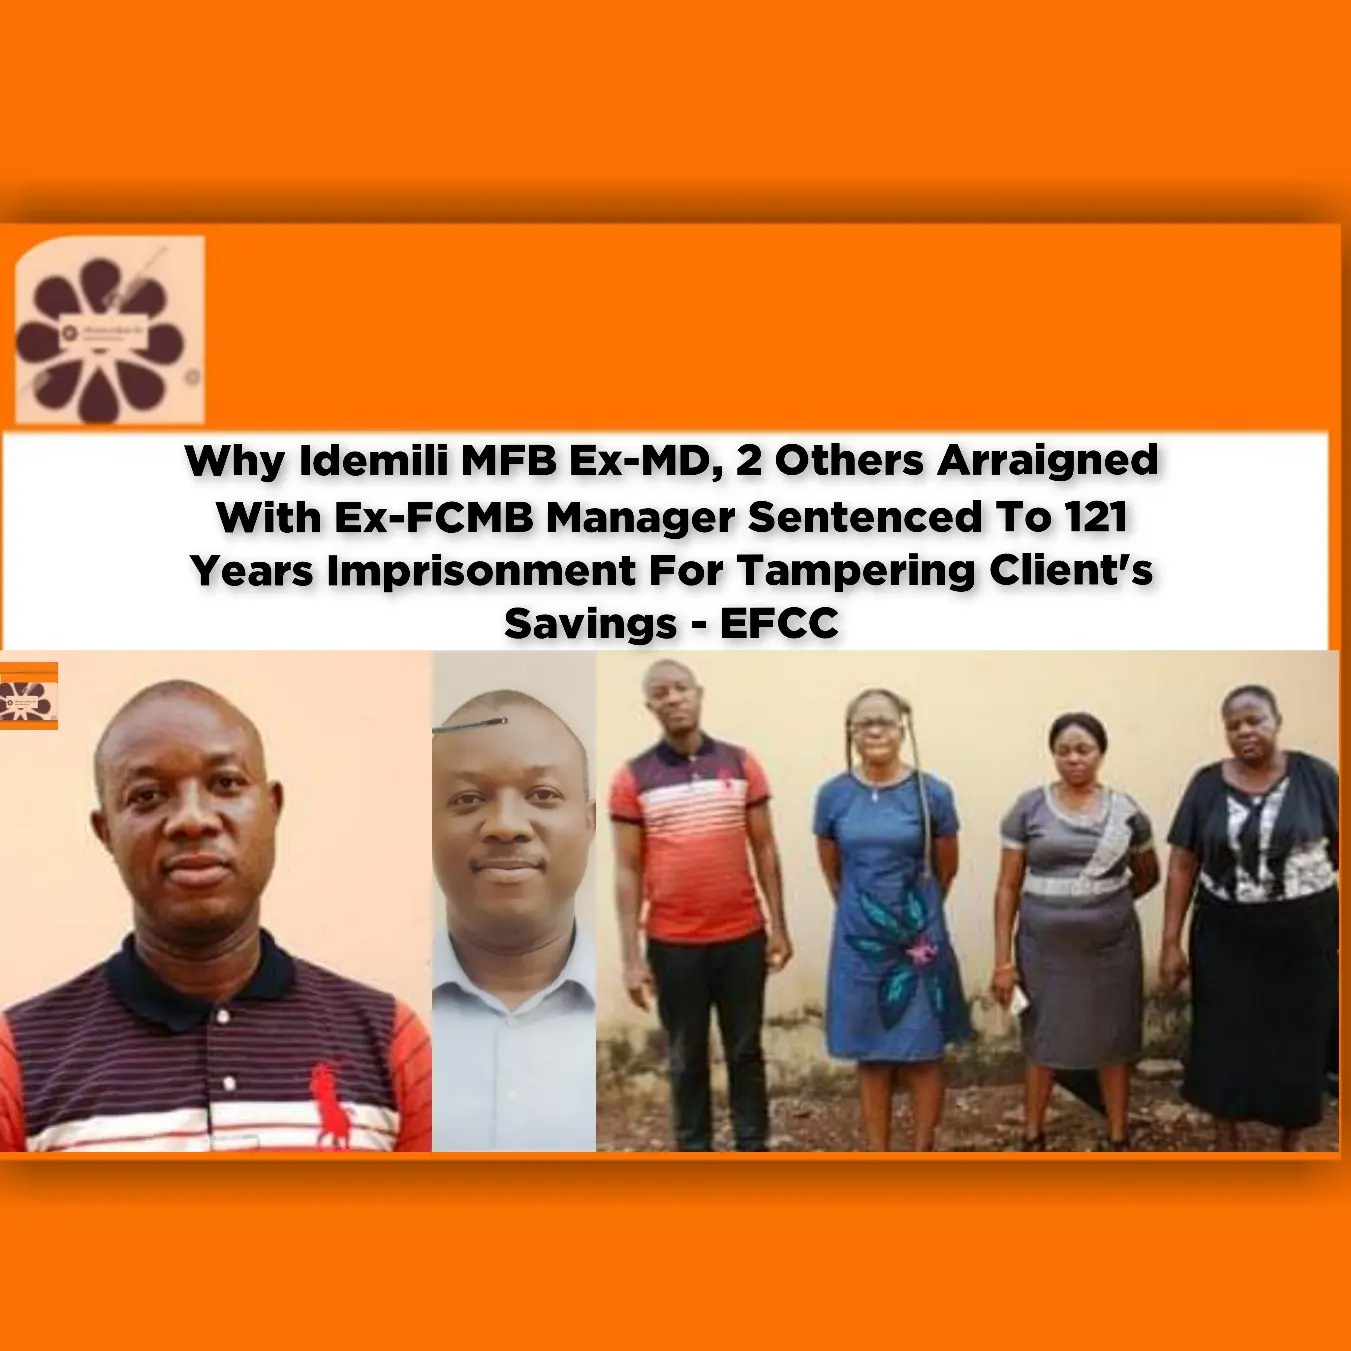 Why Idemili MFB Ex-MD, 2 Others Arraigned With Ex-FCMB Manager Sentenced To 121 Years Imprisonment For Tampering Client's Savings - EFCC ~ OsazuwaAkonedo #121jailterm #Account #Anambra #Bank #EFCC #FCMB #Fraud #Idemili #MFB #Nwachukwu #Onitsha #Placidus #Savings